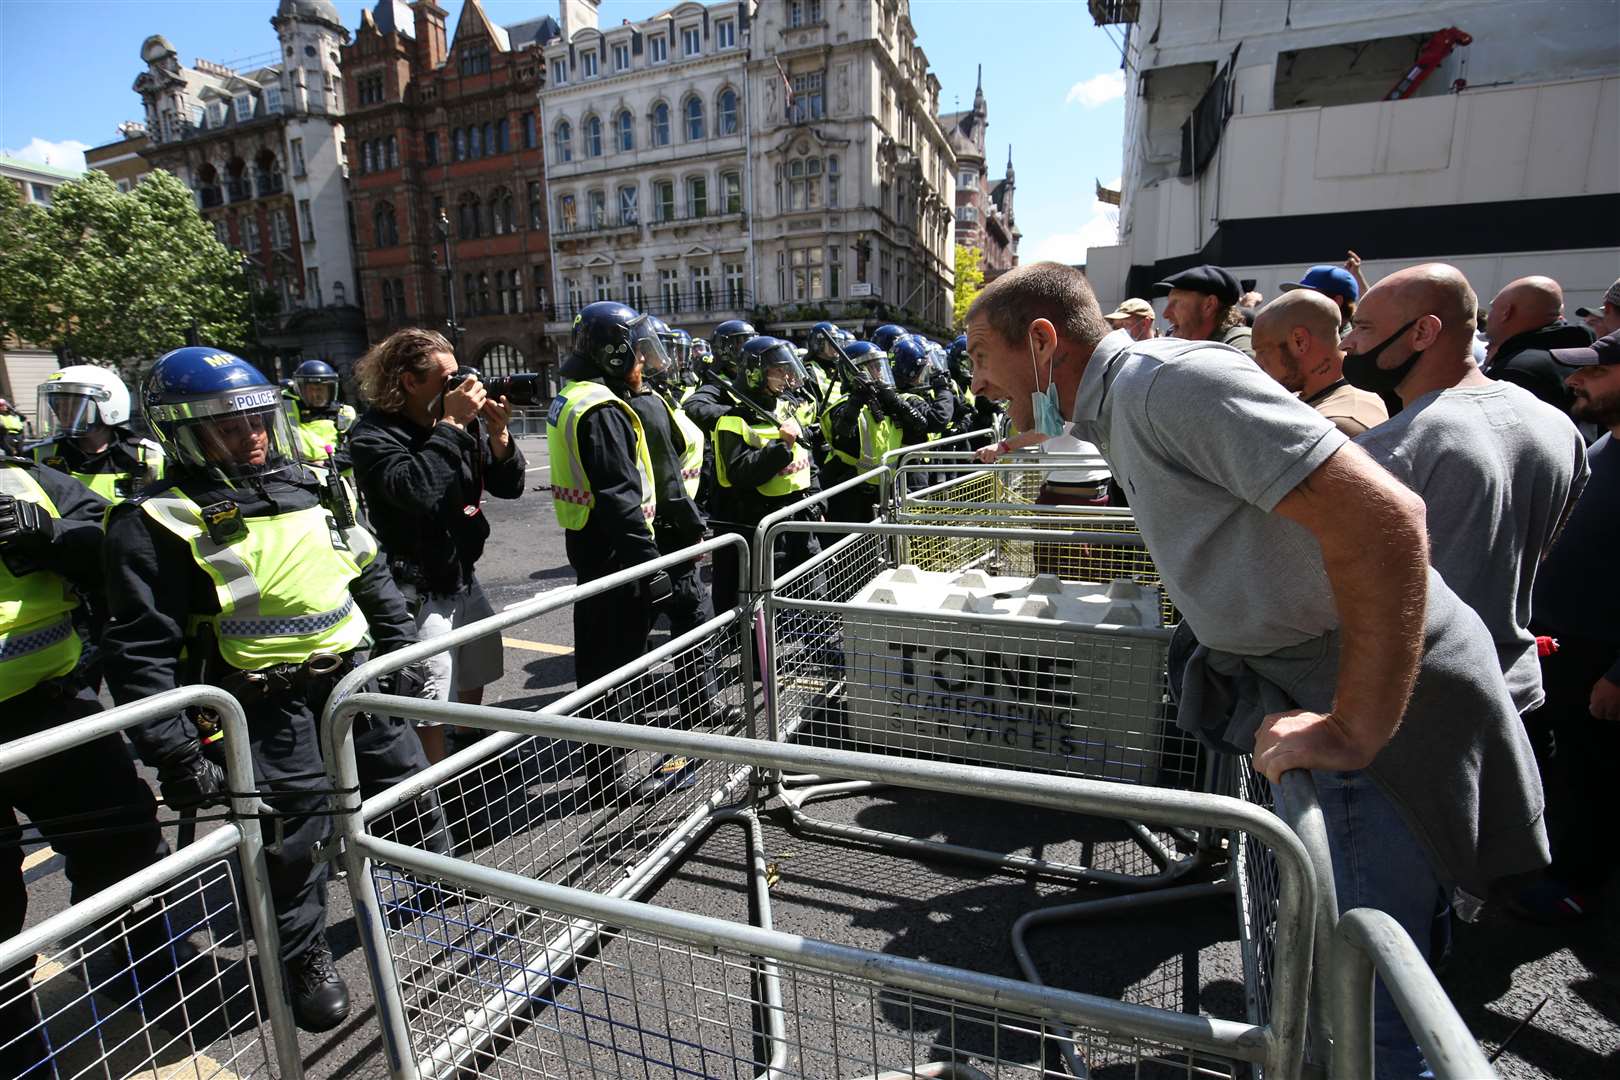 Police are confronted by protesters in Whitehall near Parliament Square, London (Jonathan Brady/PA)